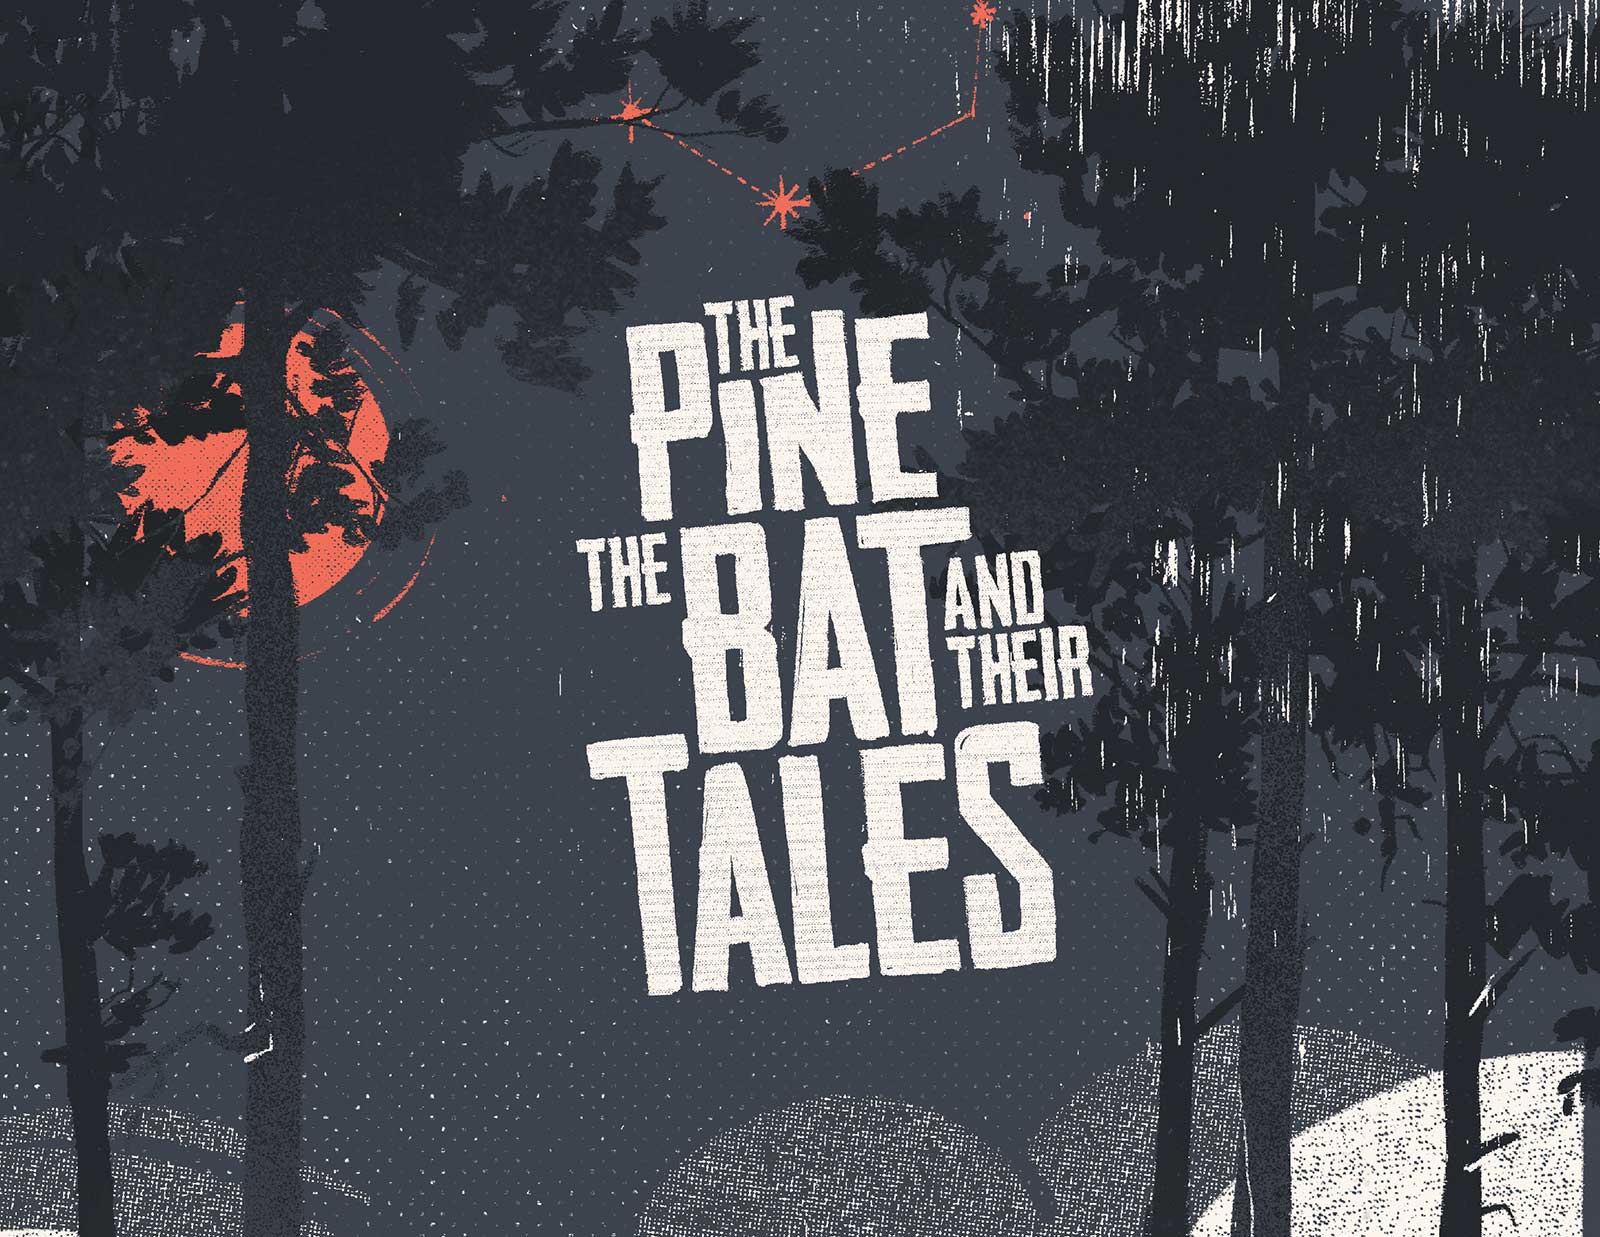 The Pine, The Bat, and Their Tales